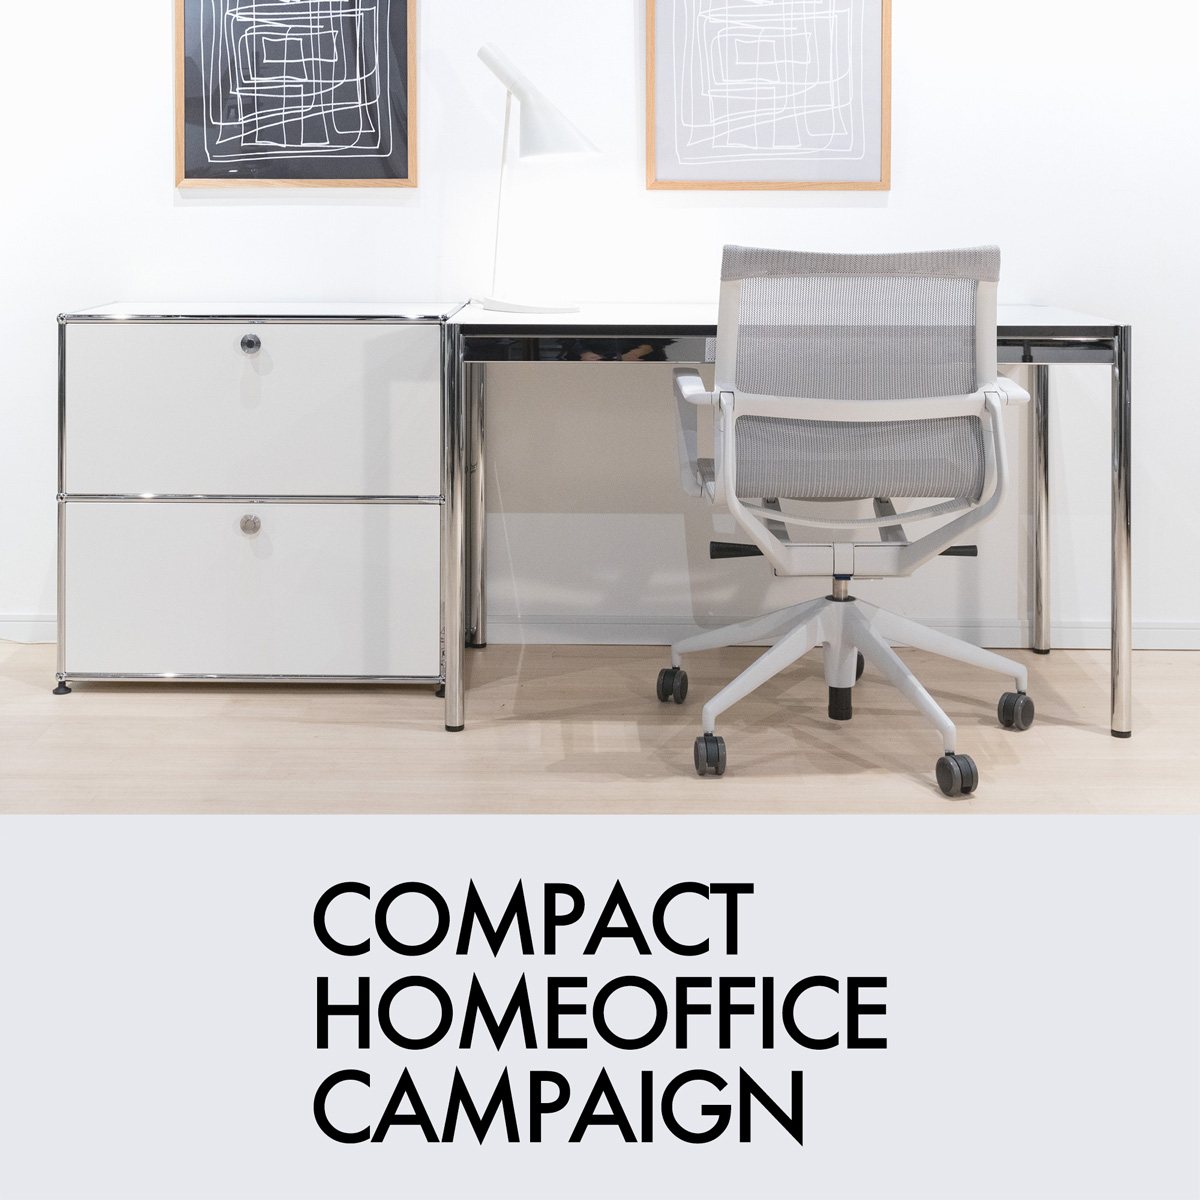 Compact Home Office Campaign（コンパクトホームオフィス キャンペーン）